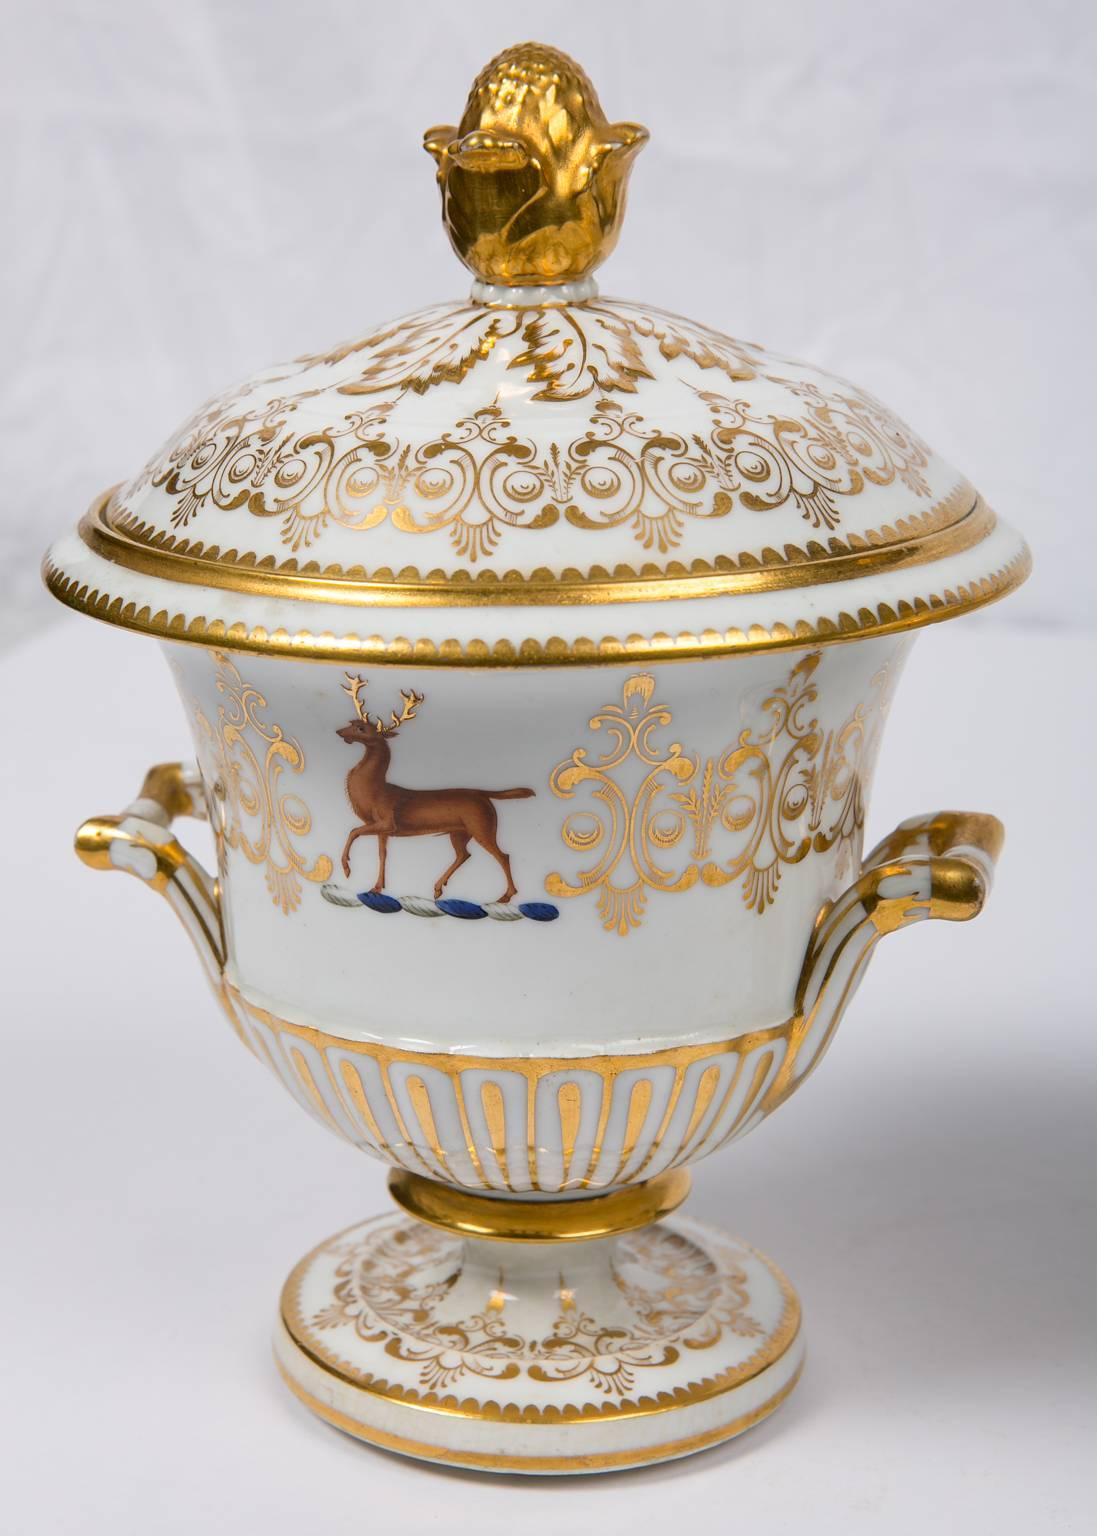 A pair of Chamberlain Worcester porcelain tureens with armorial crests.
What makes these tureens so beautiful is the lavish gold gilding on the finials, on the oak leaves around the finials, and on the gilded design of scrolling vines around the